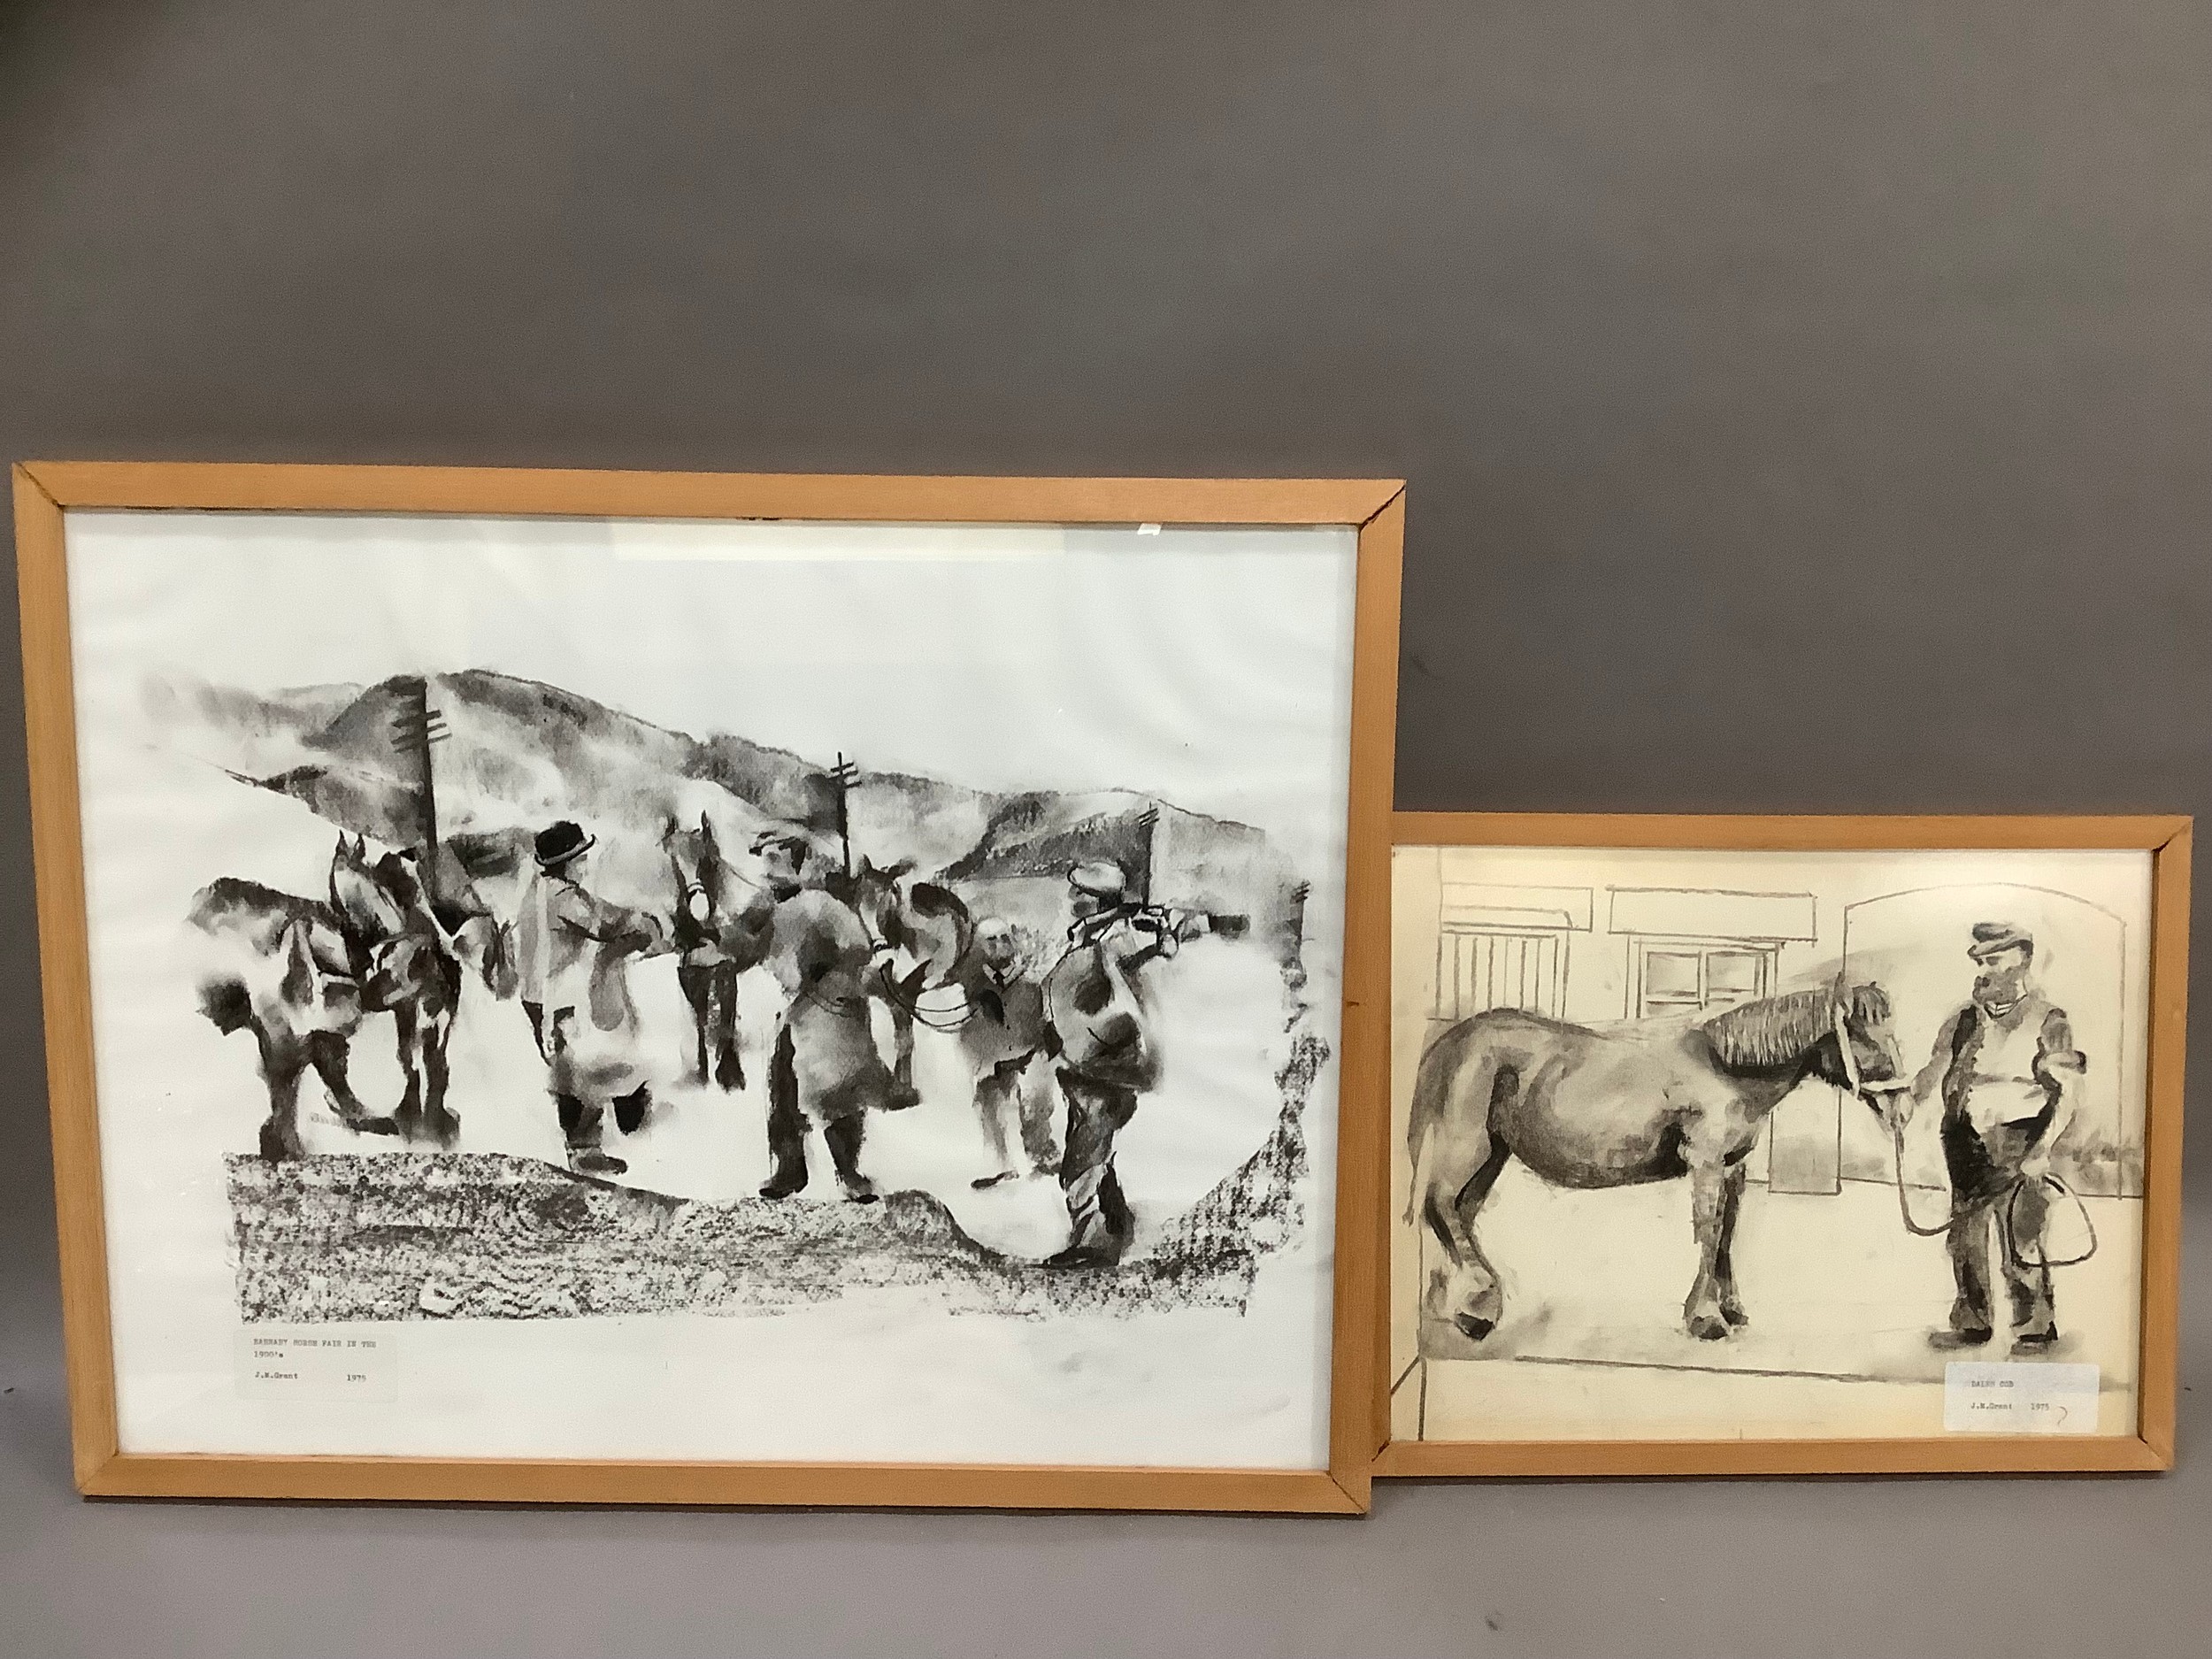 J W Grant - Barnaby horse fair in the 1900s, monochrome watercolour and charcoal, titled and